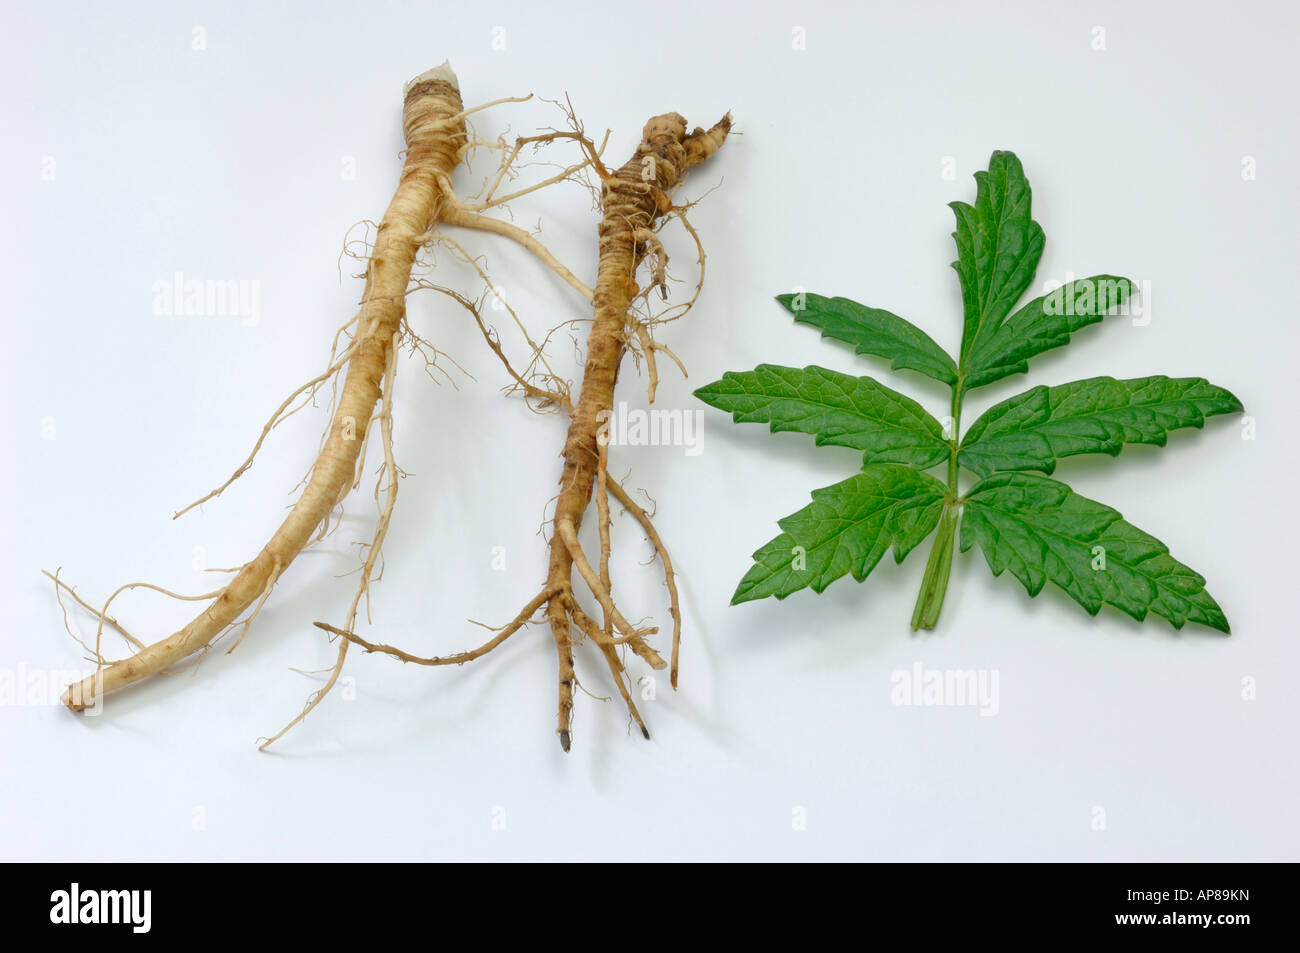 Aniseed (Pimpinella major) roots and leaves studio picture Stock Photo